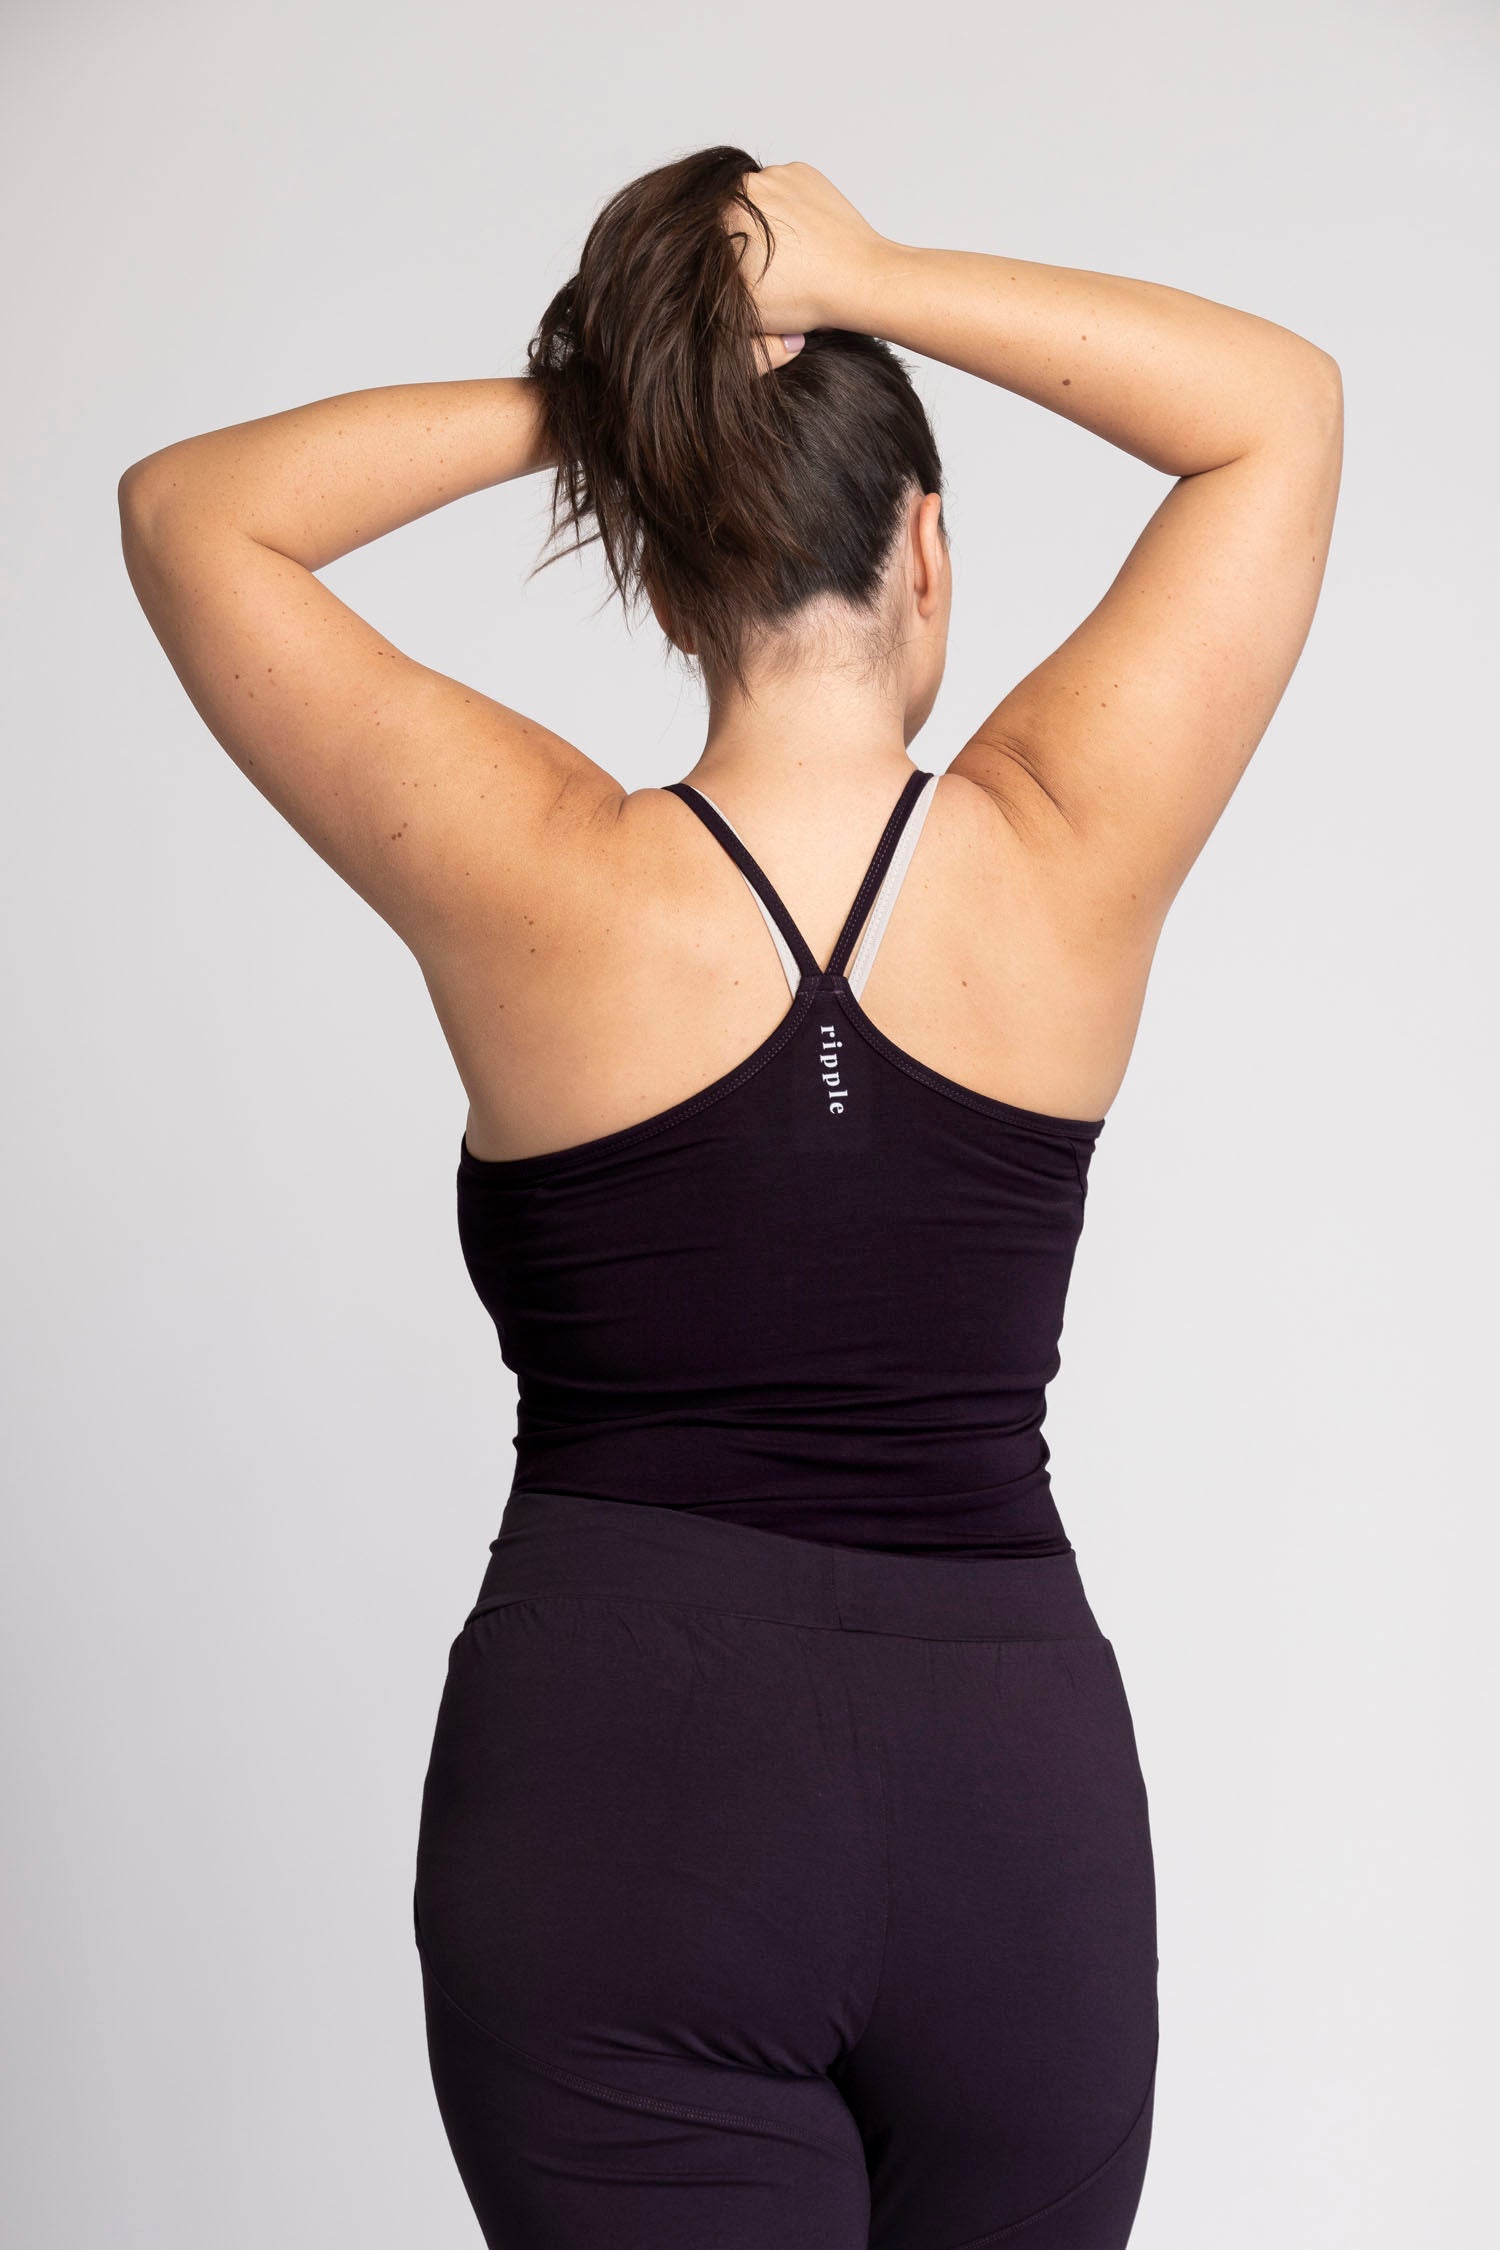 Thoughts on sizing up on the Align Racerback Waist Length? : r